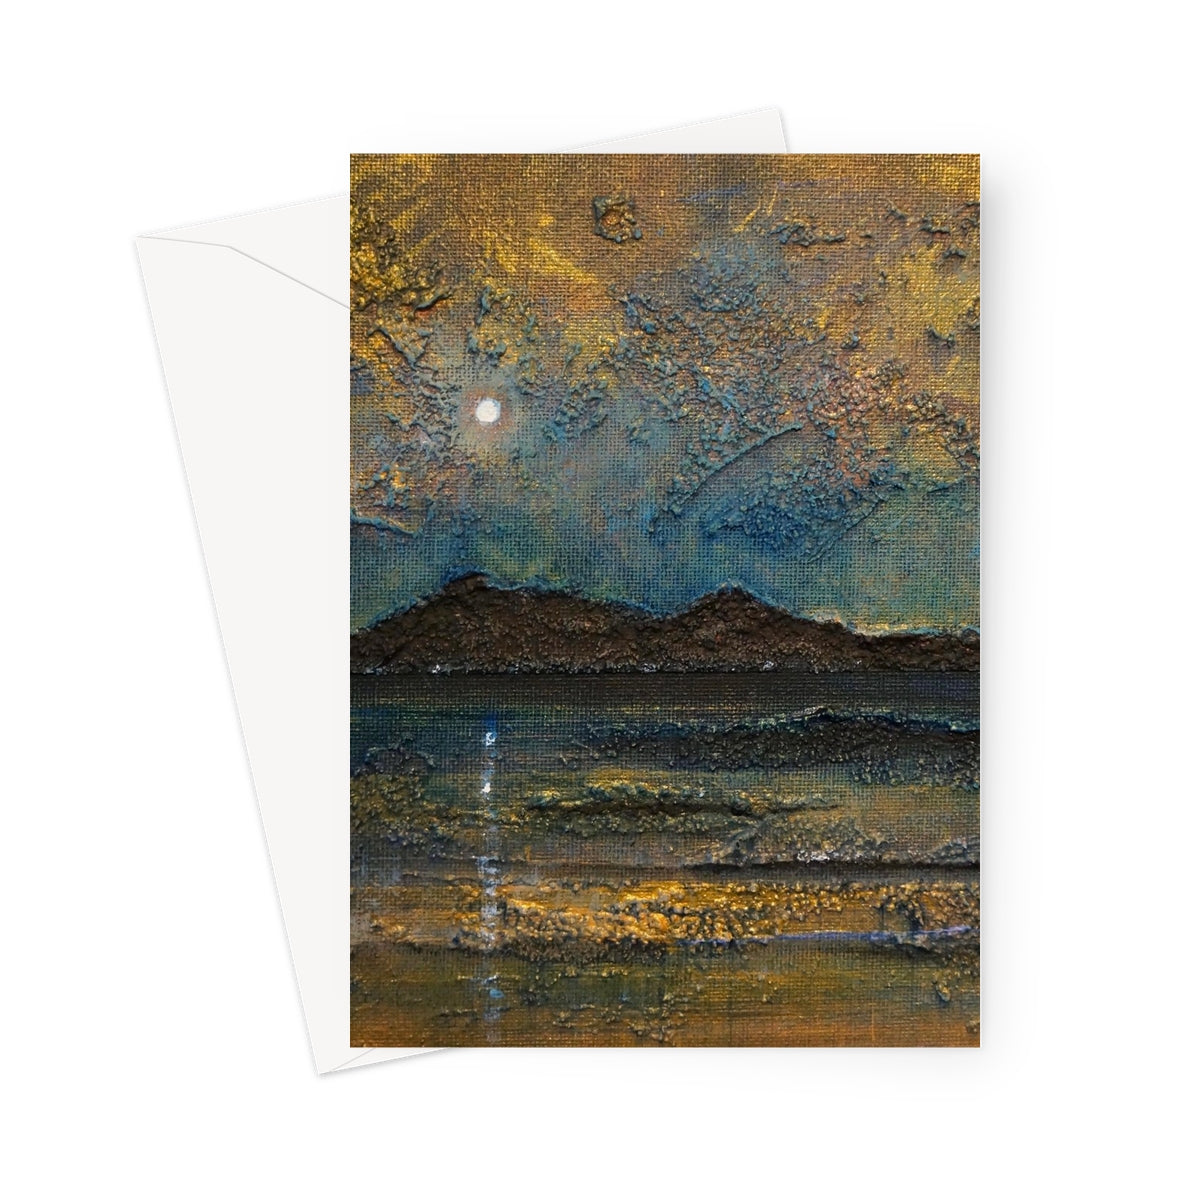 Arran Moonlight Art Gifts Greeting Card-Greetings Cards-Arran Art Gallery-5"x7"-1 Card-Paintings, Prints, Homeware, Art Gifts From Scotland By Scottish Artist Kevin Hunter